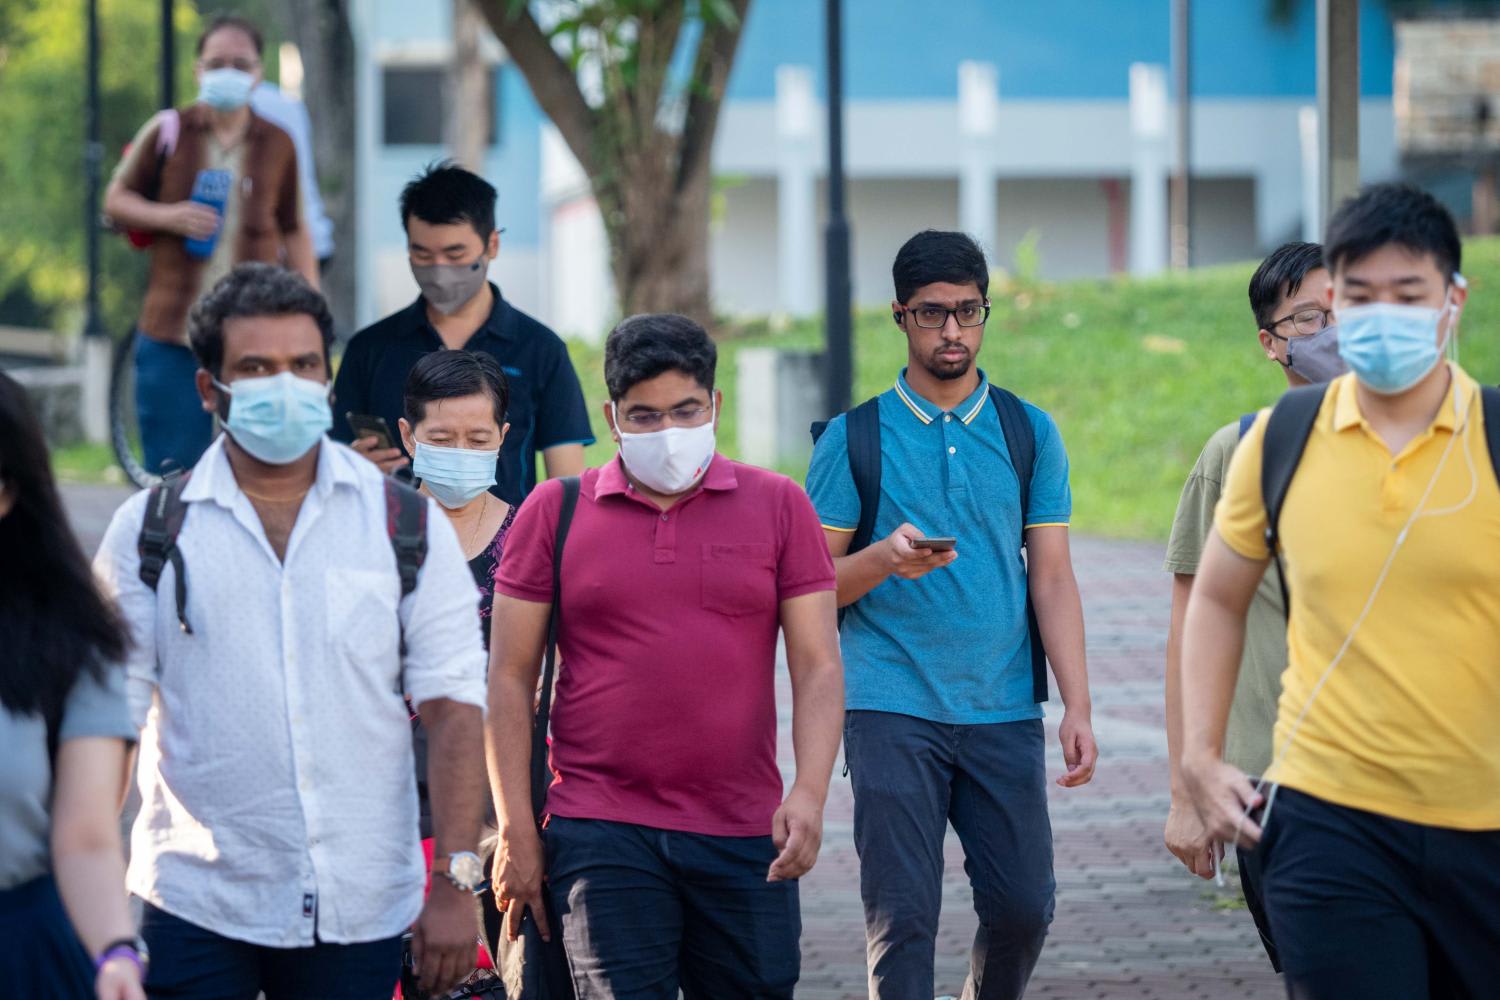 Pedestrians seen in Tampines on March 29, 2022, the first day when people are allowed to choose not to wear masks when outdoors.